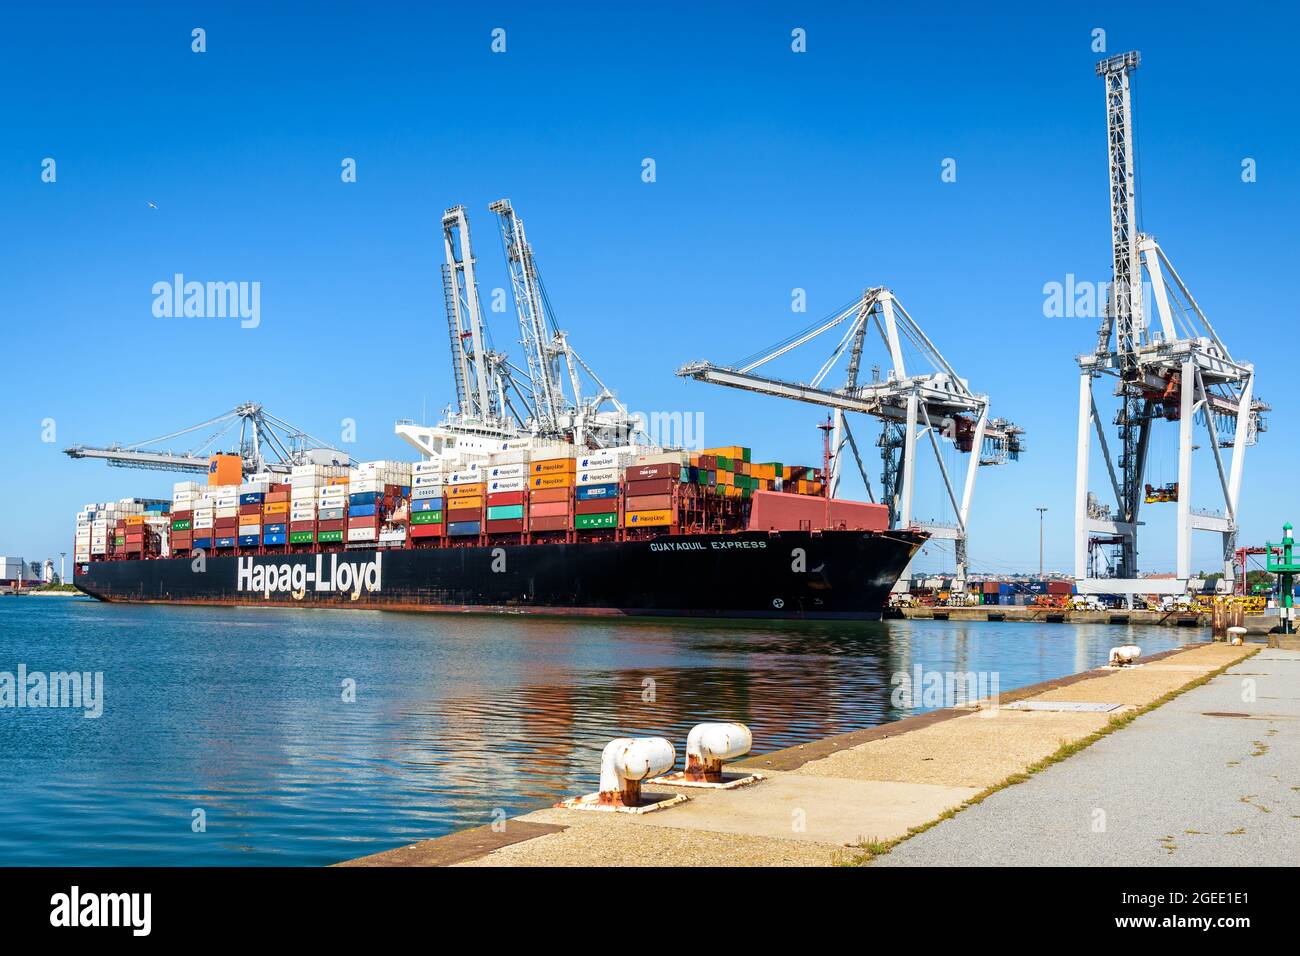 The Guayaquil Express container ship from Hapag-Lloyd shipping company being loaded by container gantry cranes in the port of Le Havre, France. Stock Photo